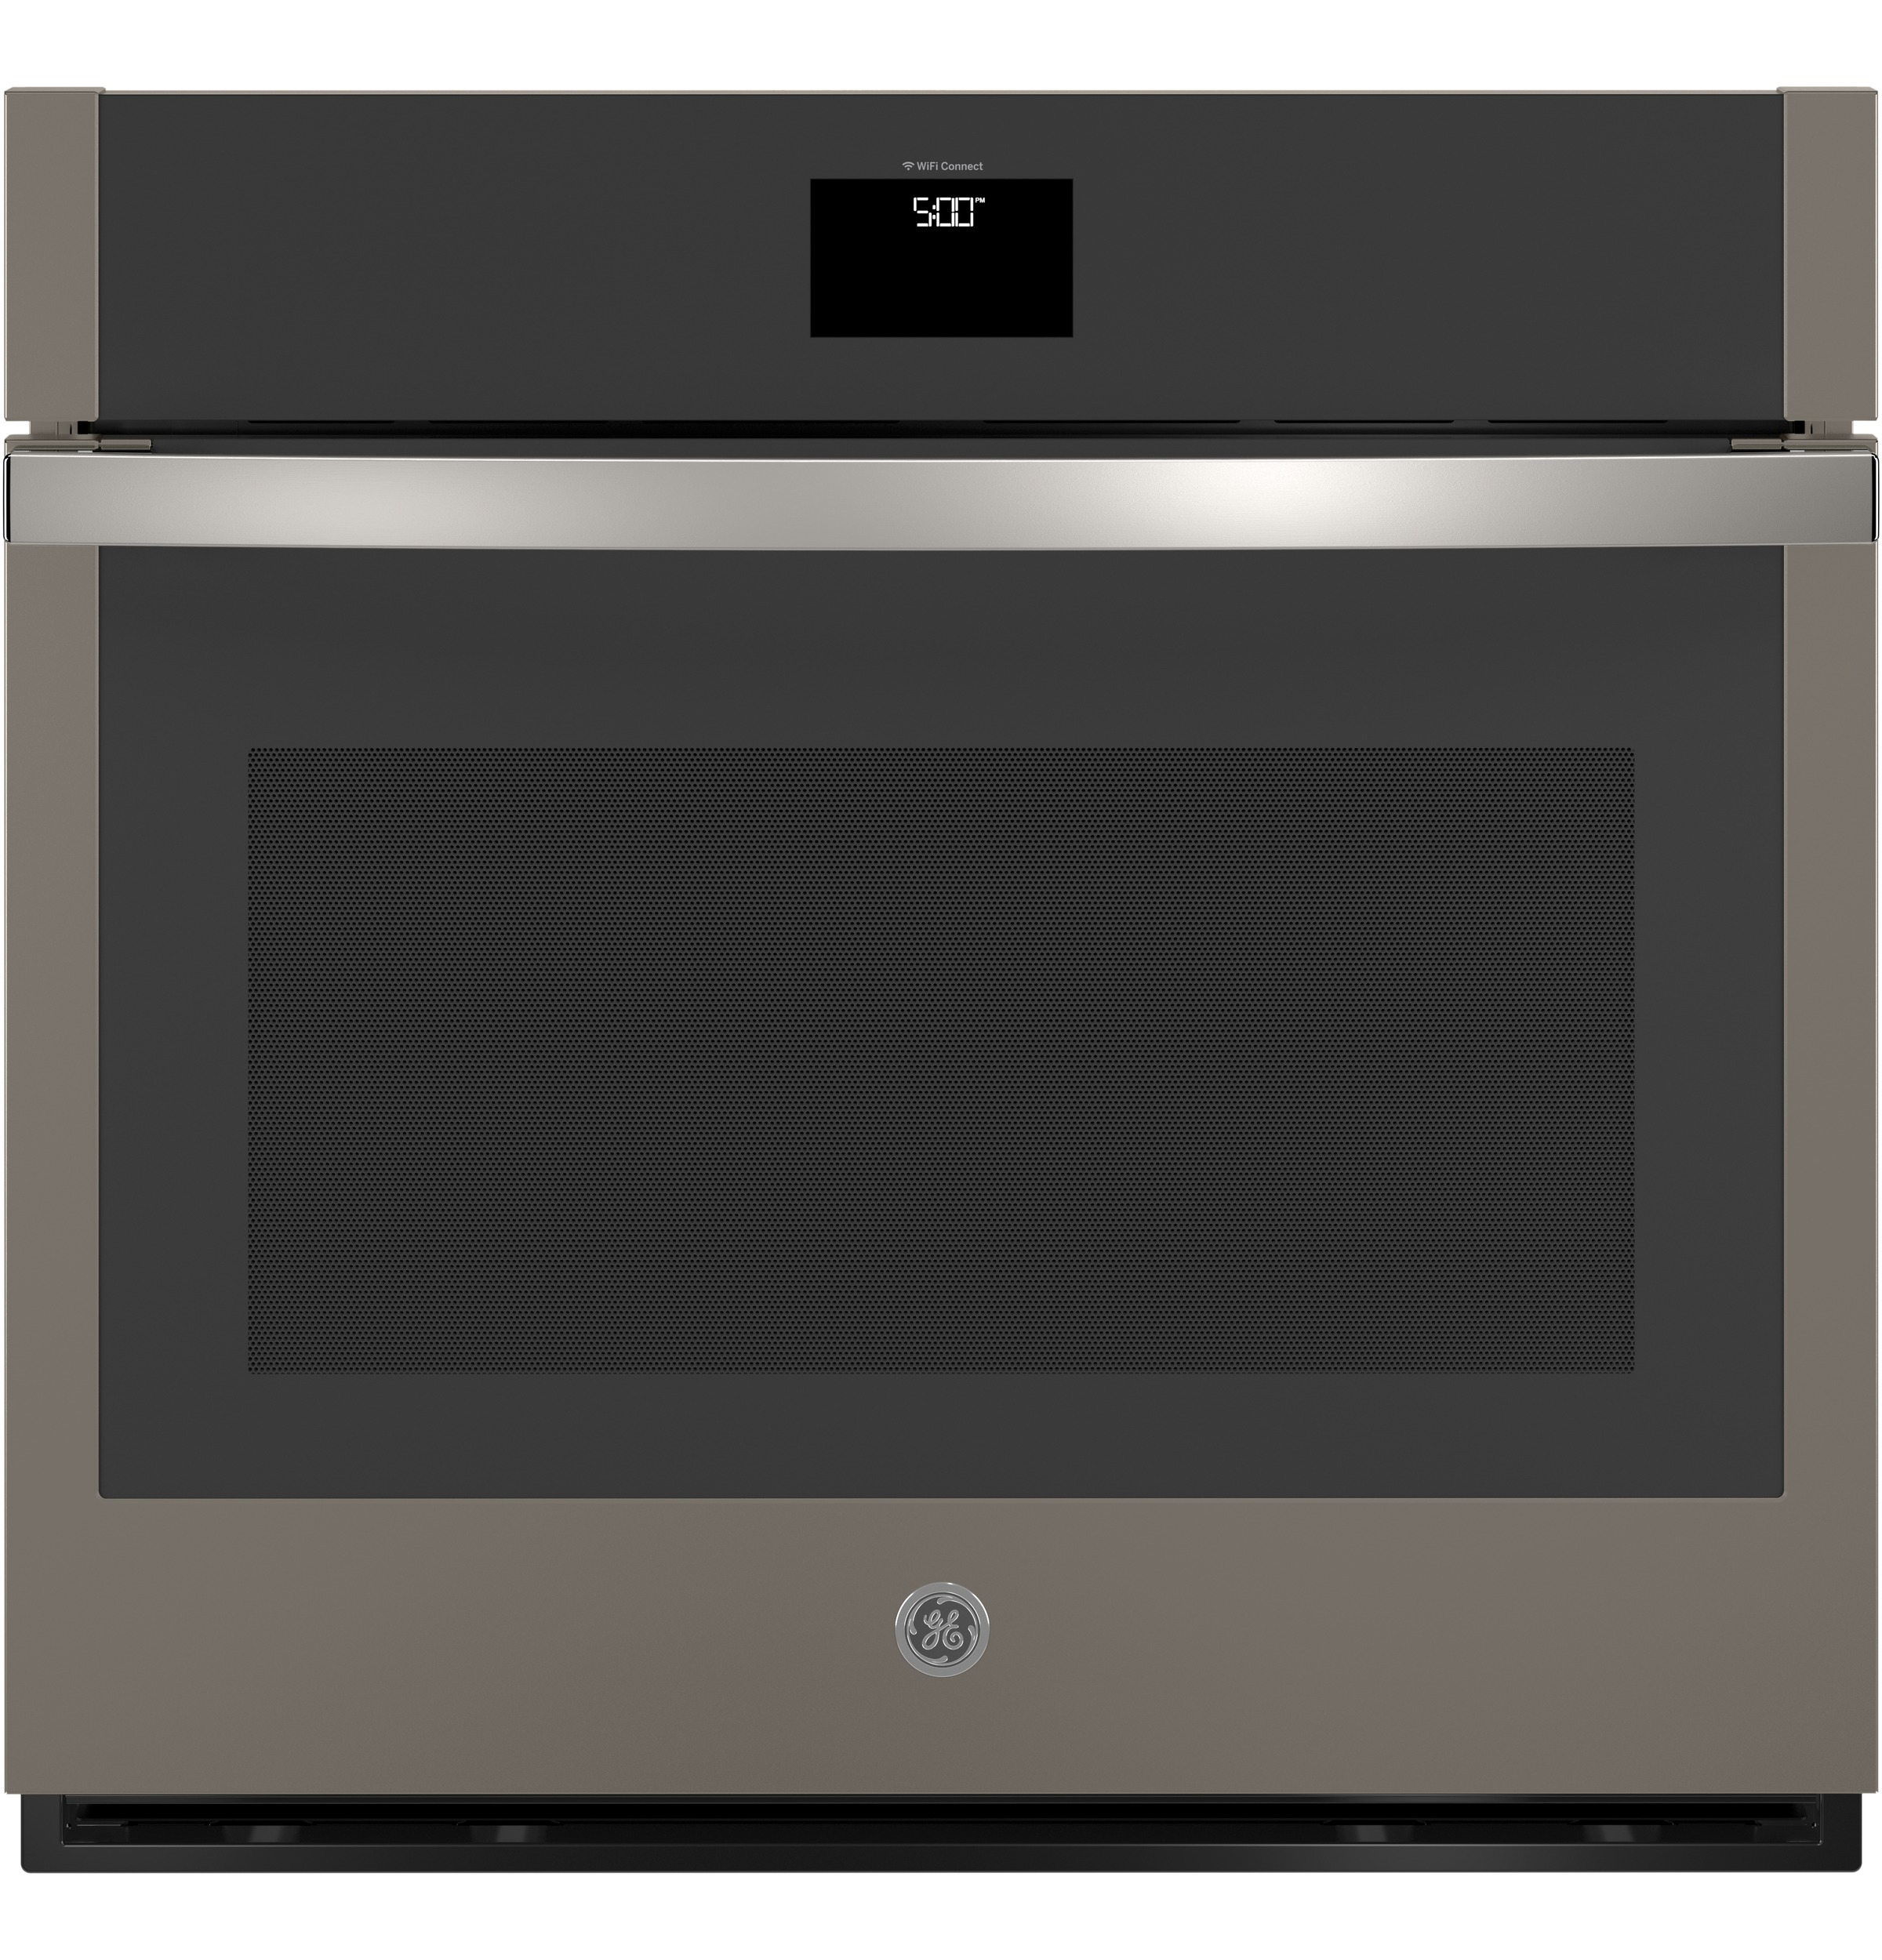 GE Appliances JTS5000ENES 30" Built-In Convection Wall Oven - Slate